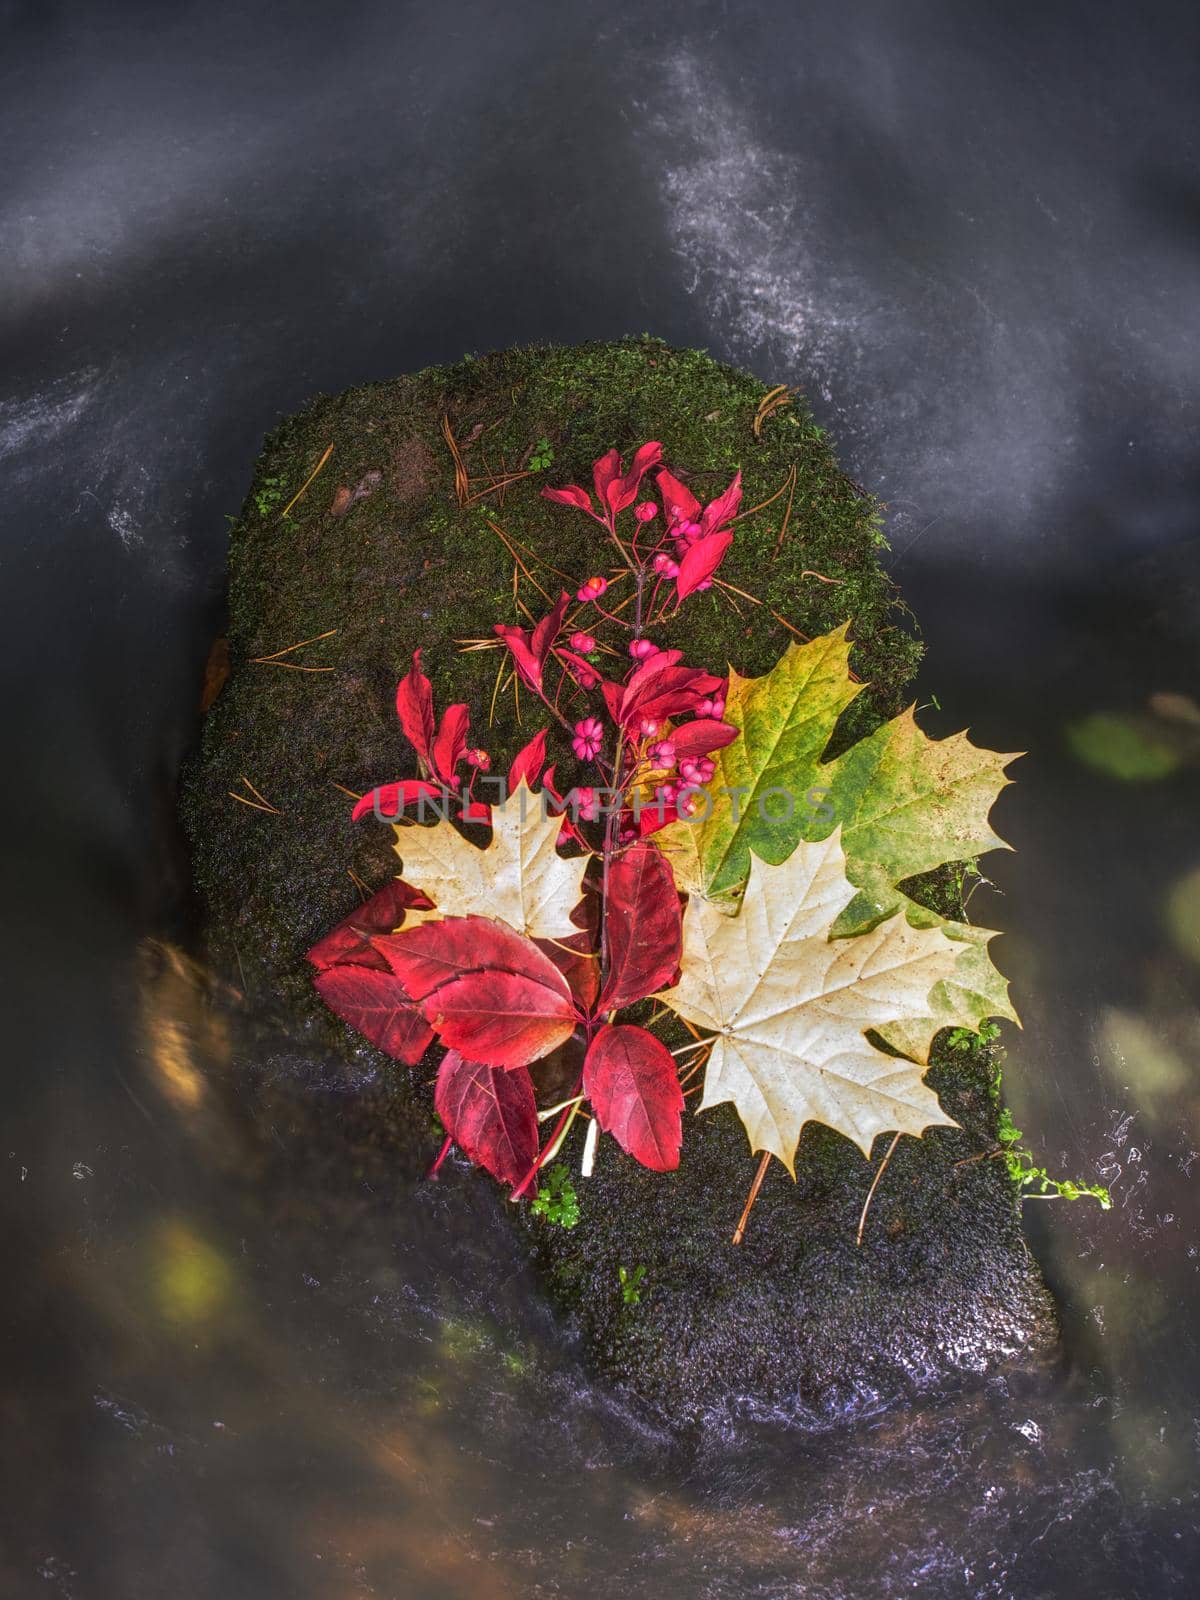 Fall bouquet of dry flowers and fallen leaves on stone in creek by rdonar2